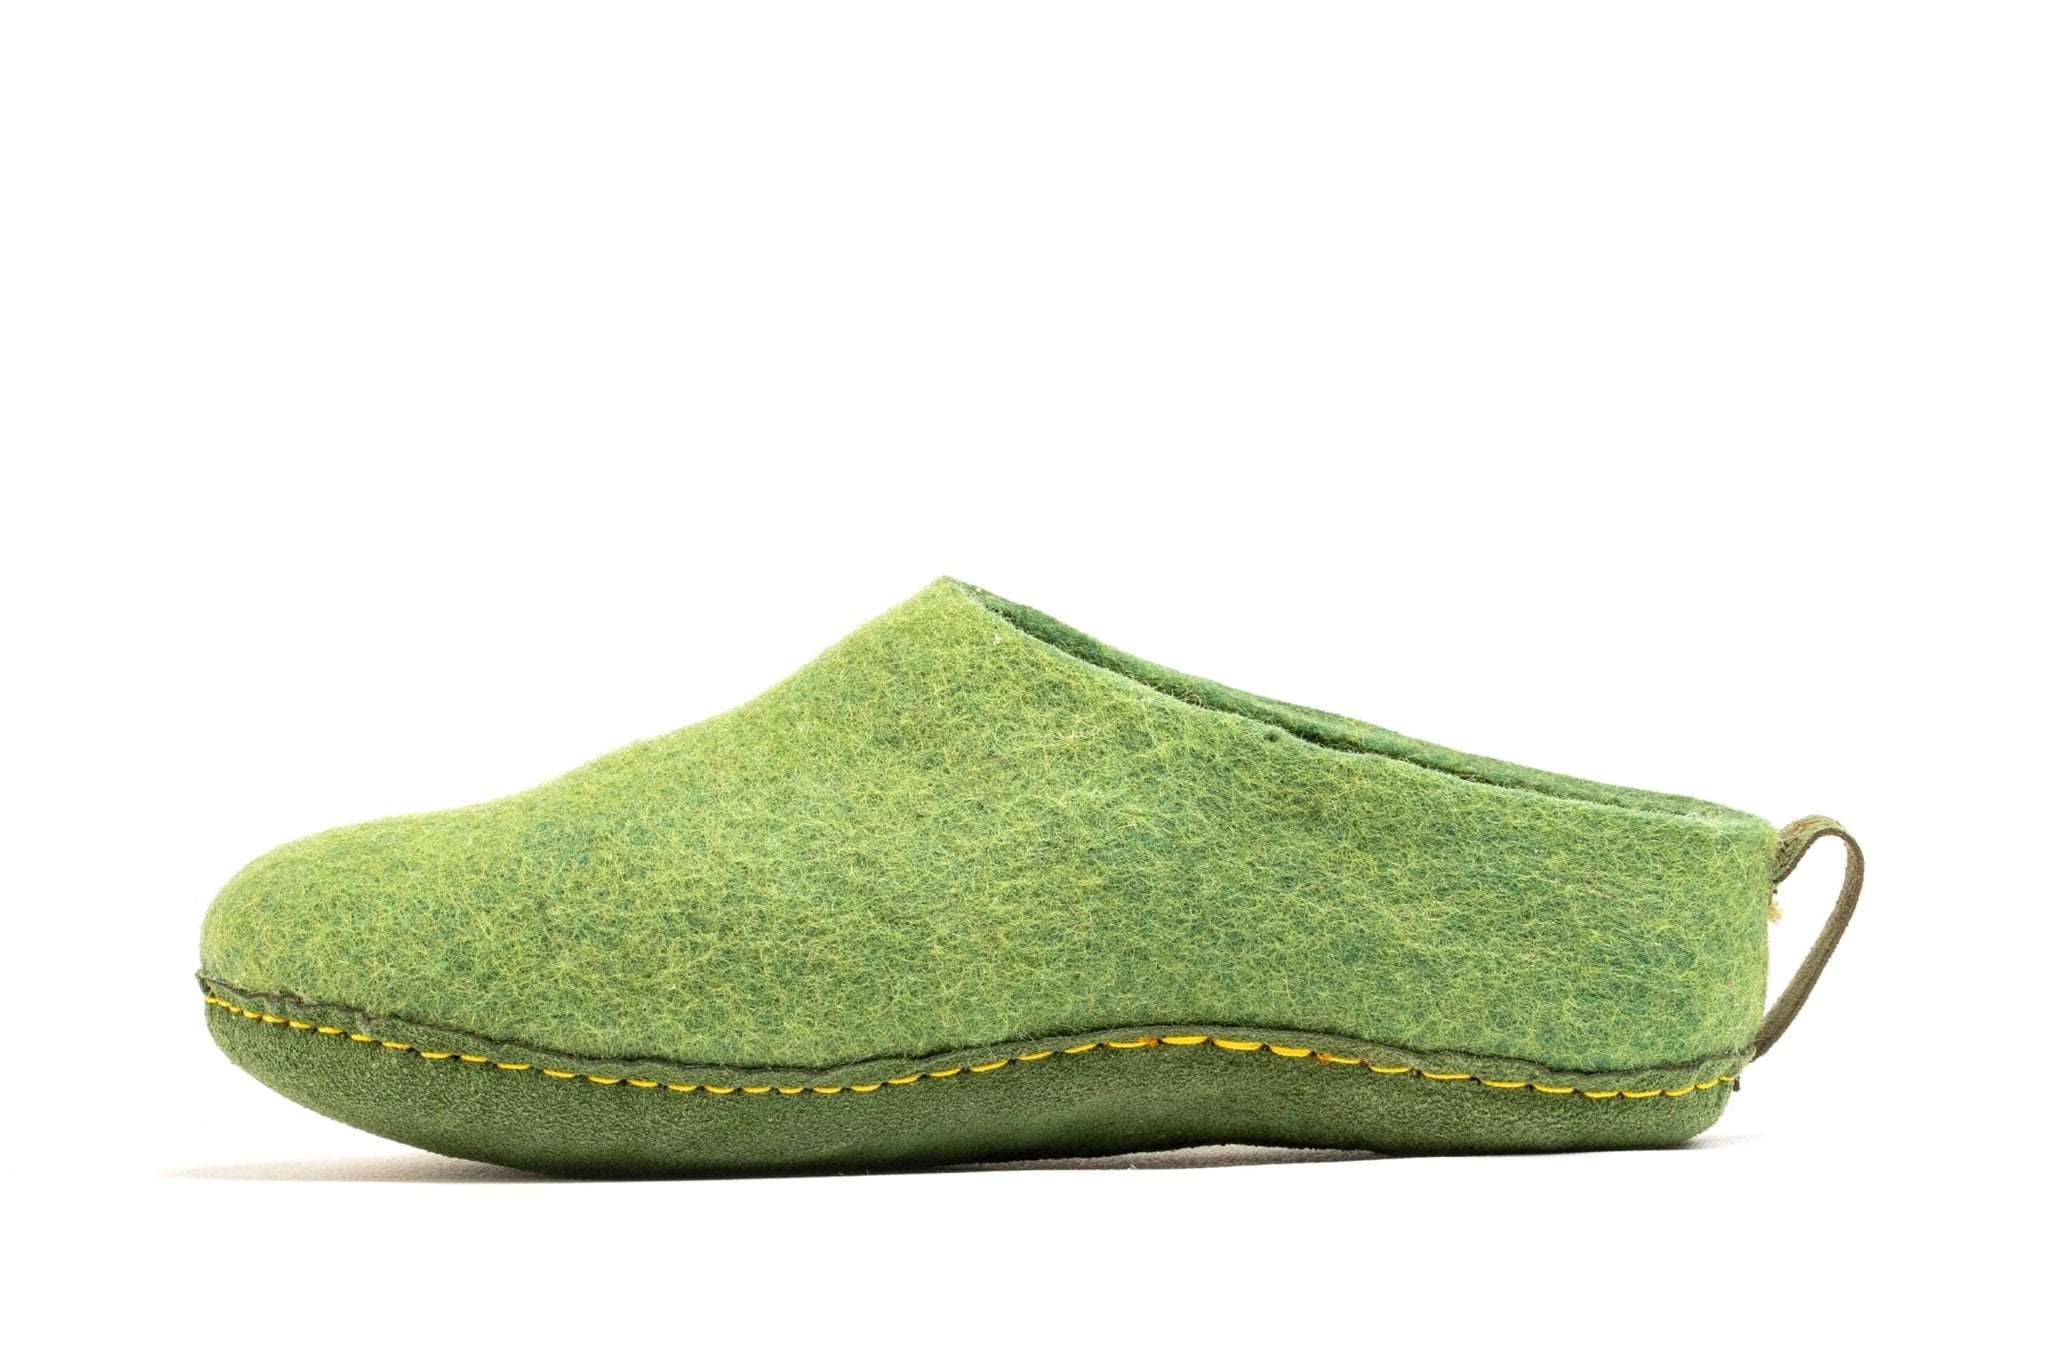 Indoor Open Heel Slippers With Leather Sole - Green - Woollyes